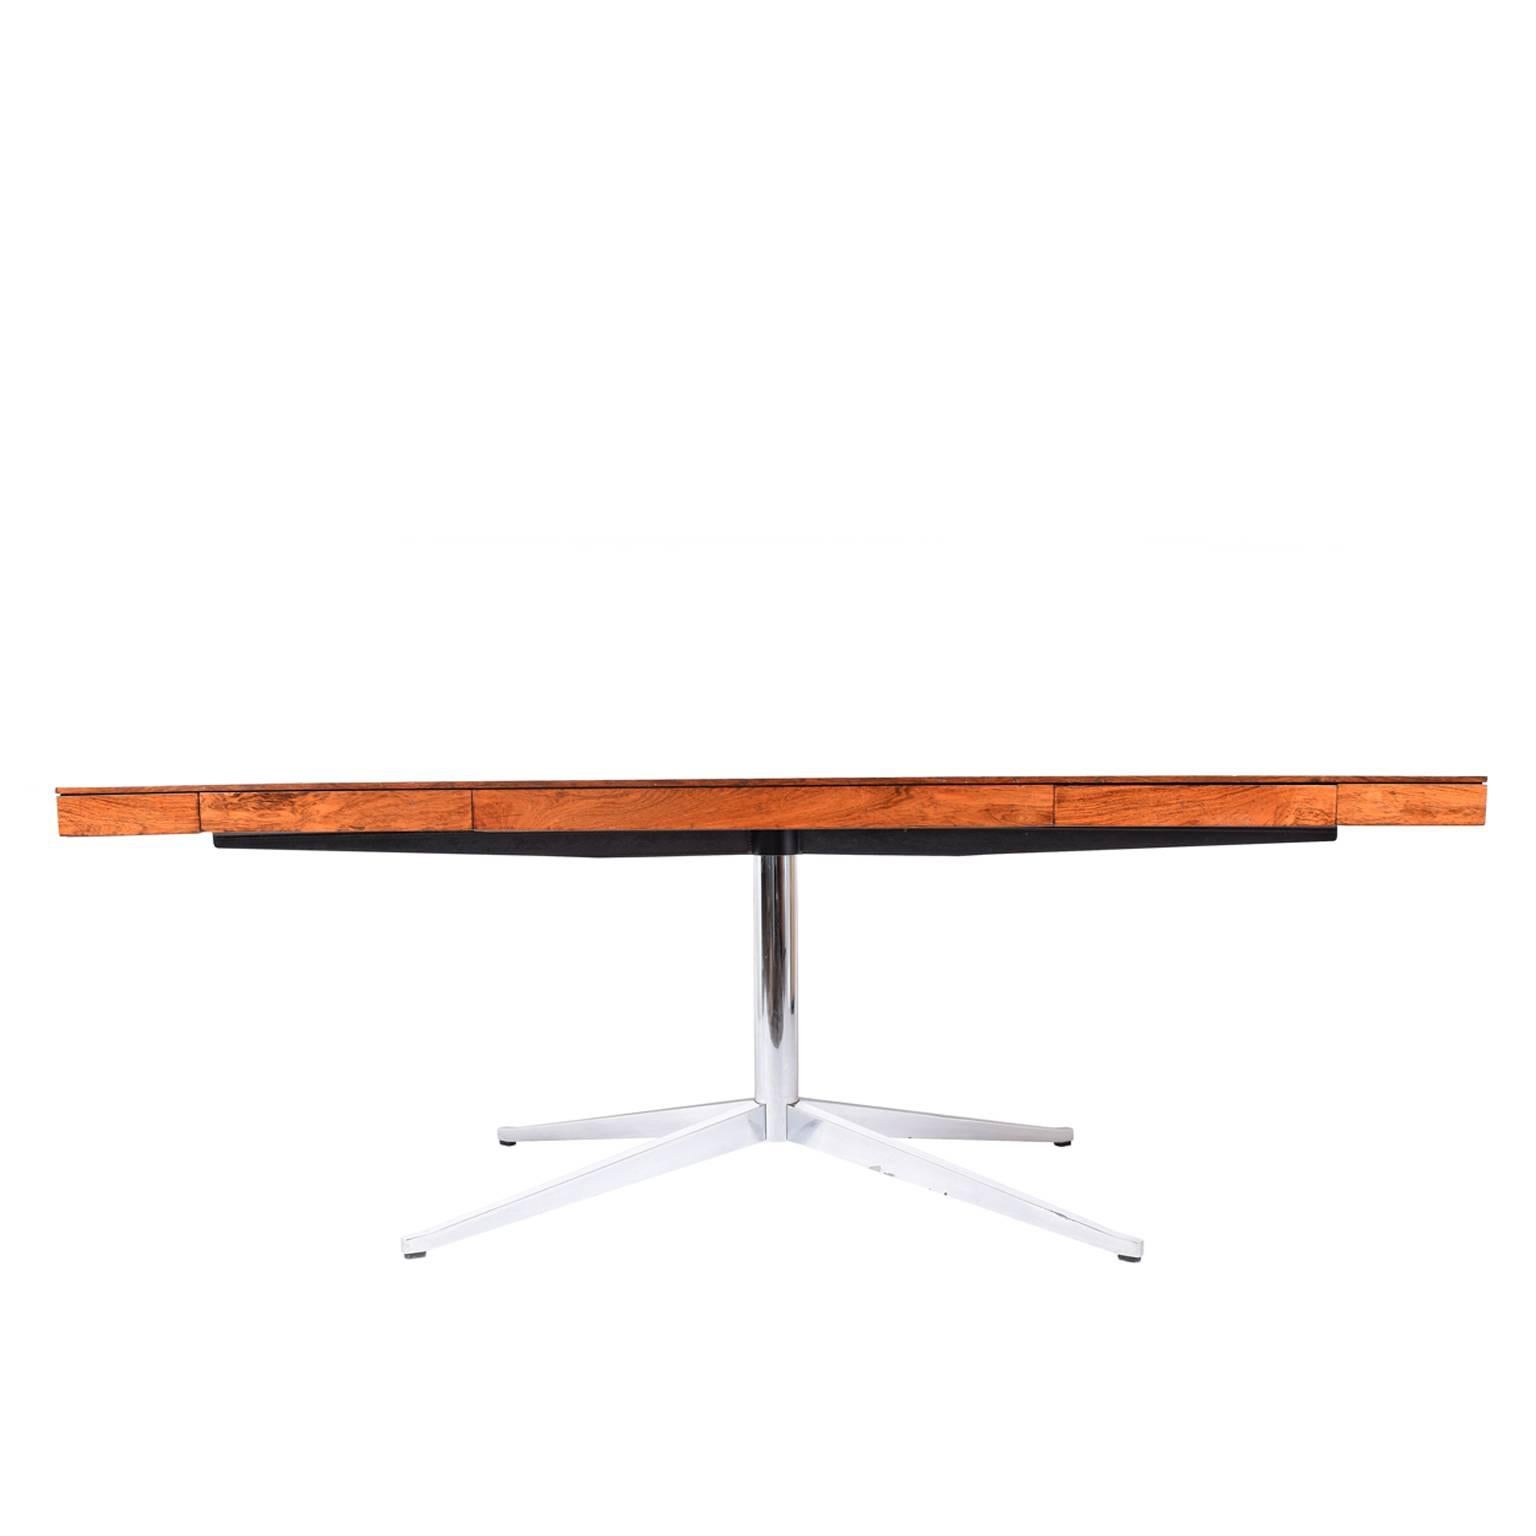 Partner's desk in rosewood, purchased in early 1970s. Box top with two small drawers on each side on polished chrome four star pedestal base. Made by Knoll Associates.